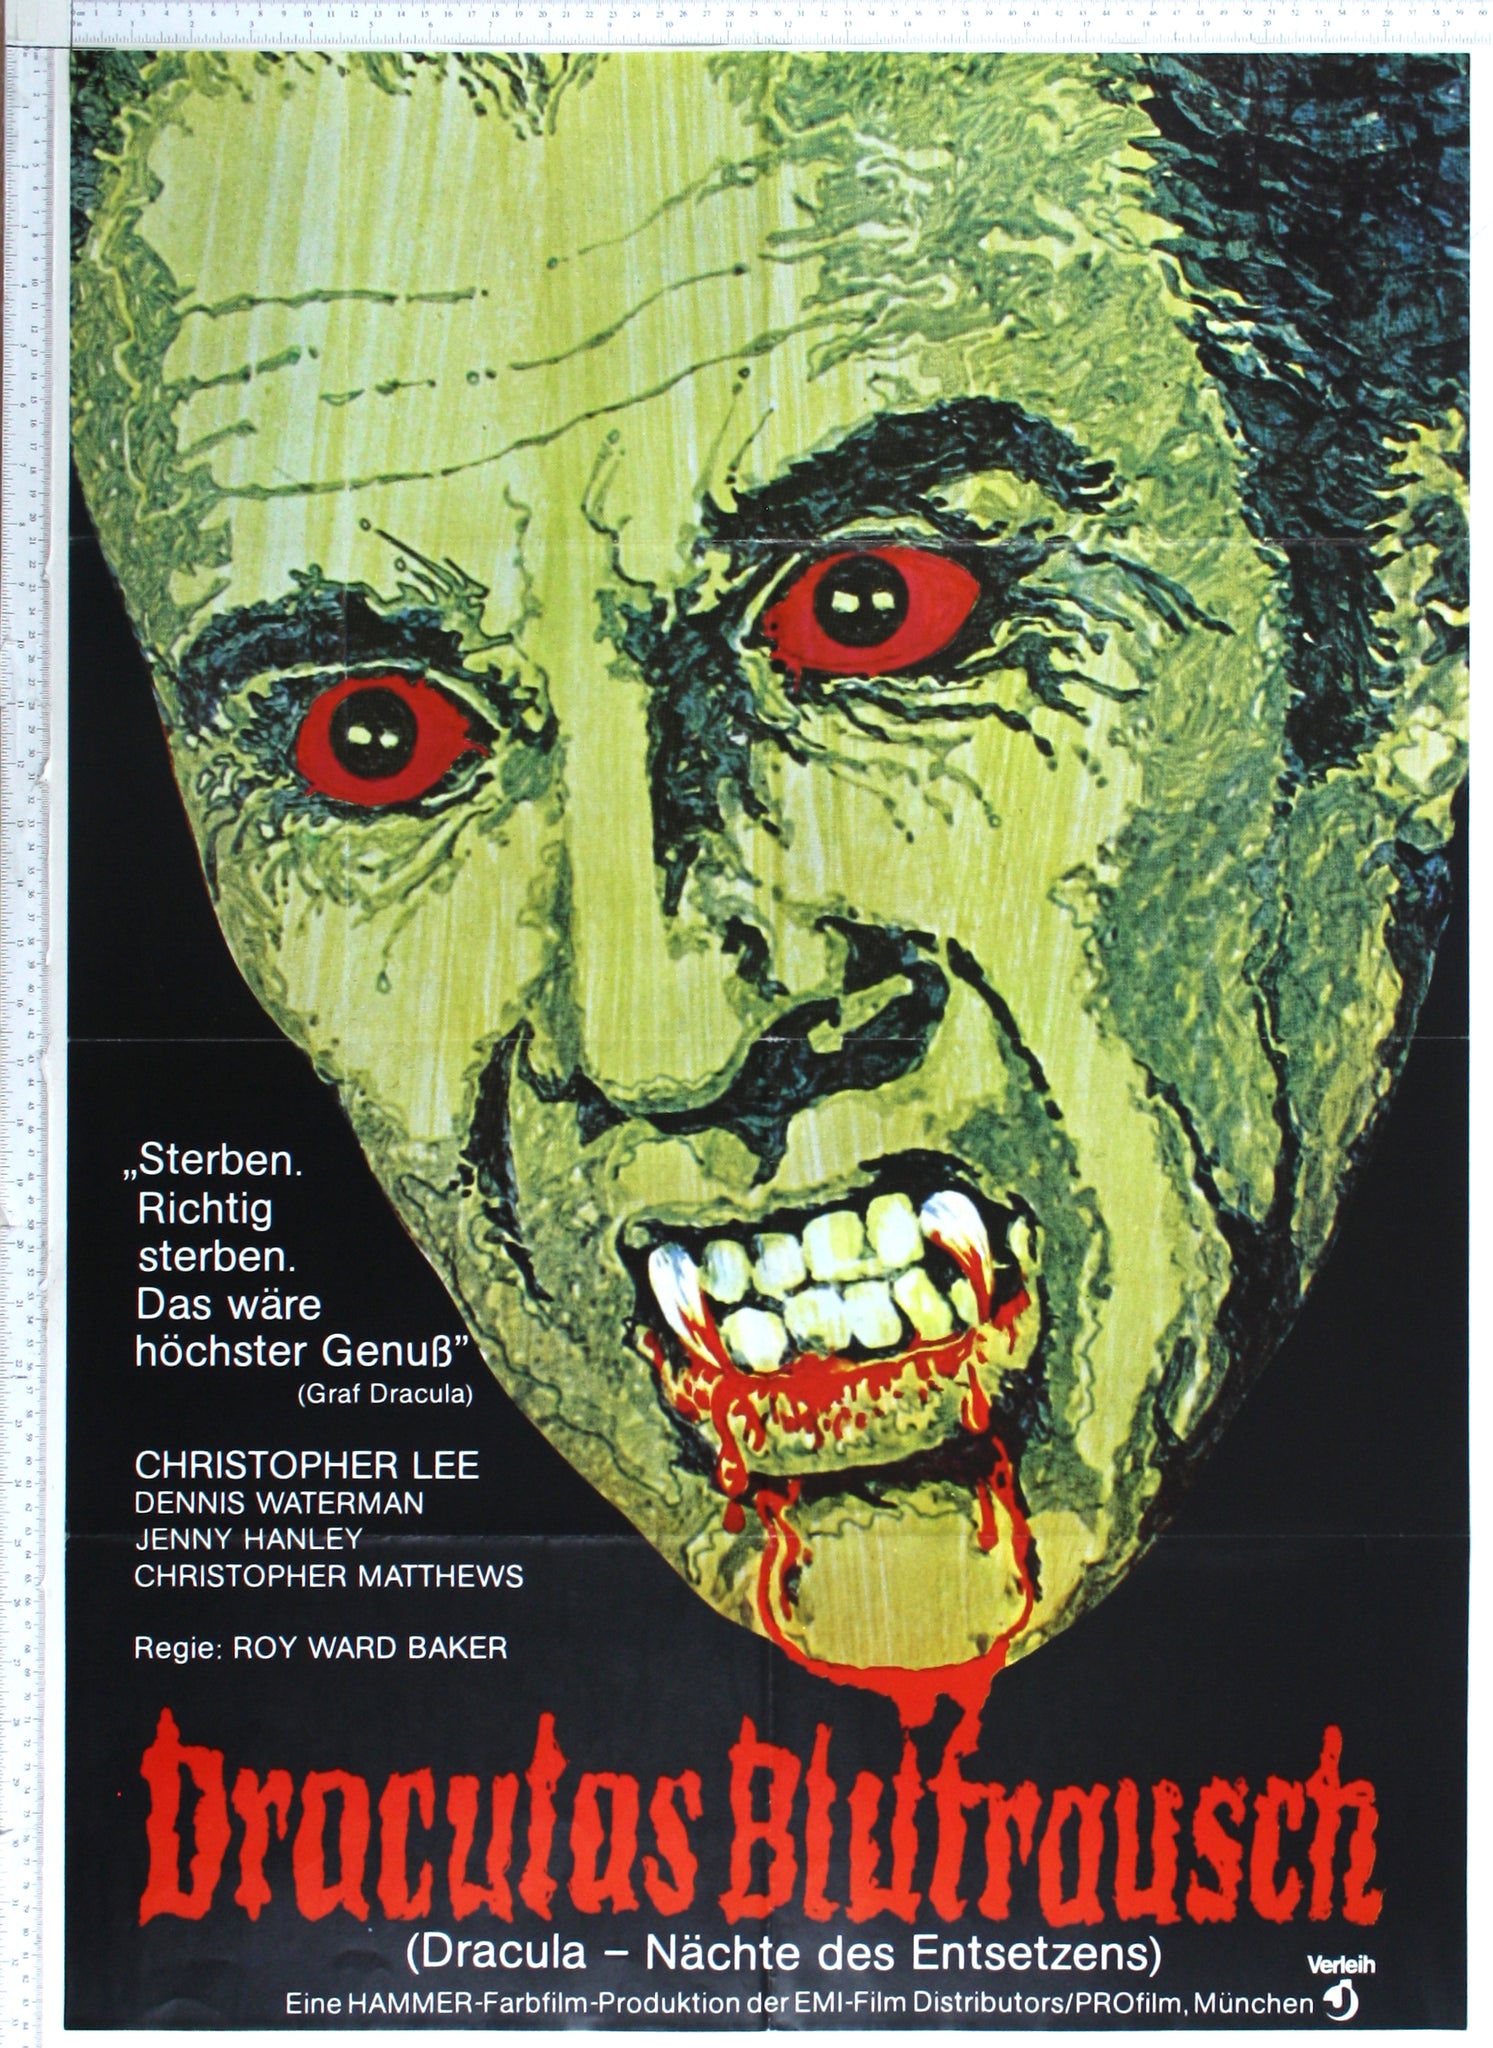 Scars of Dracula (1970) German A1 Poster